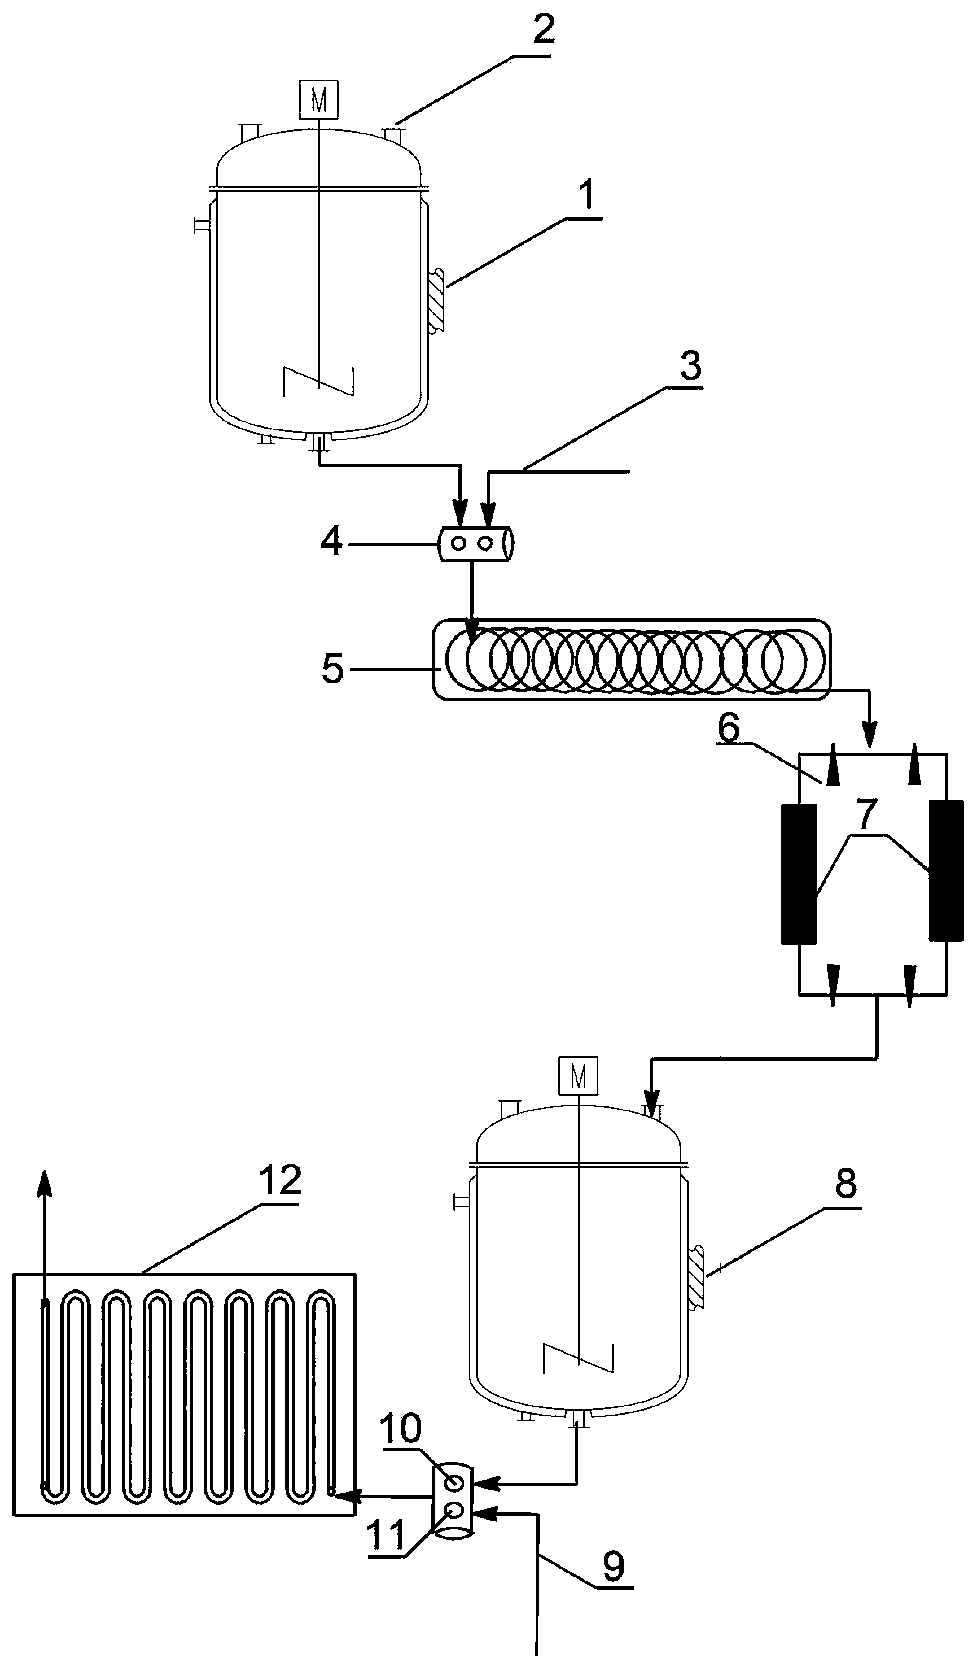 Continuous preparation method and preparation device of N-n-butyl thiophosphoric triamide